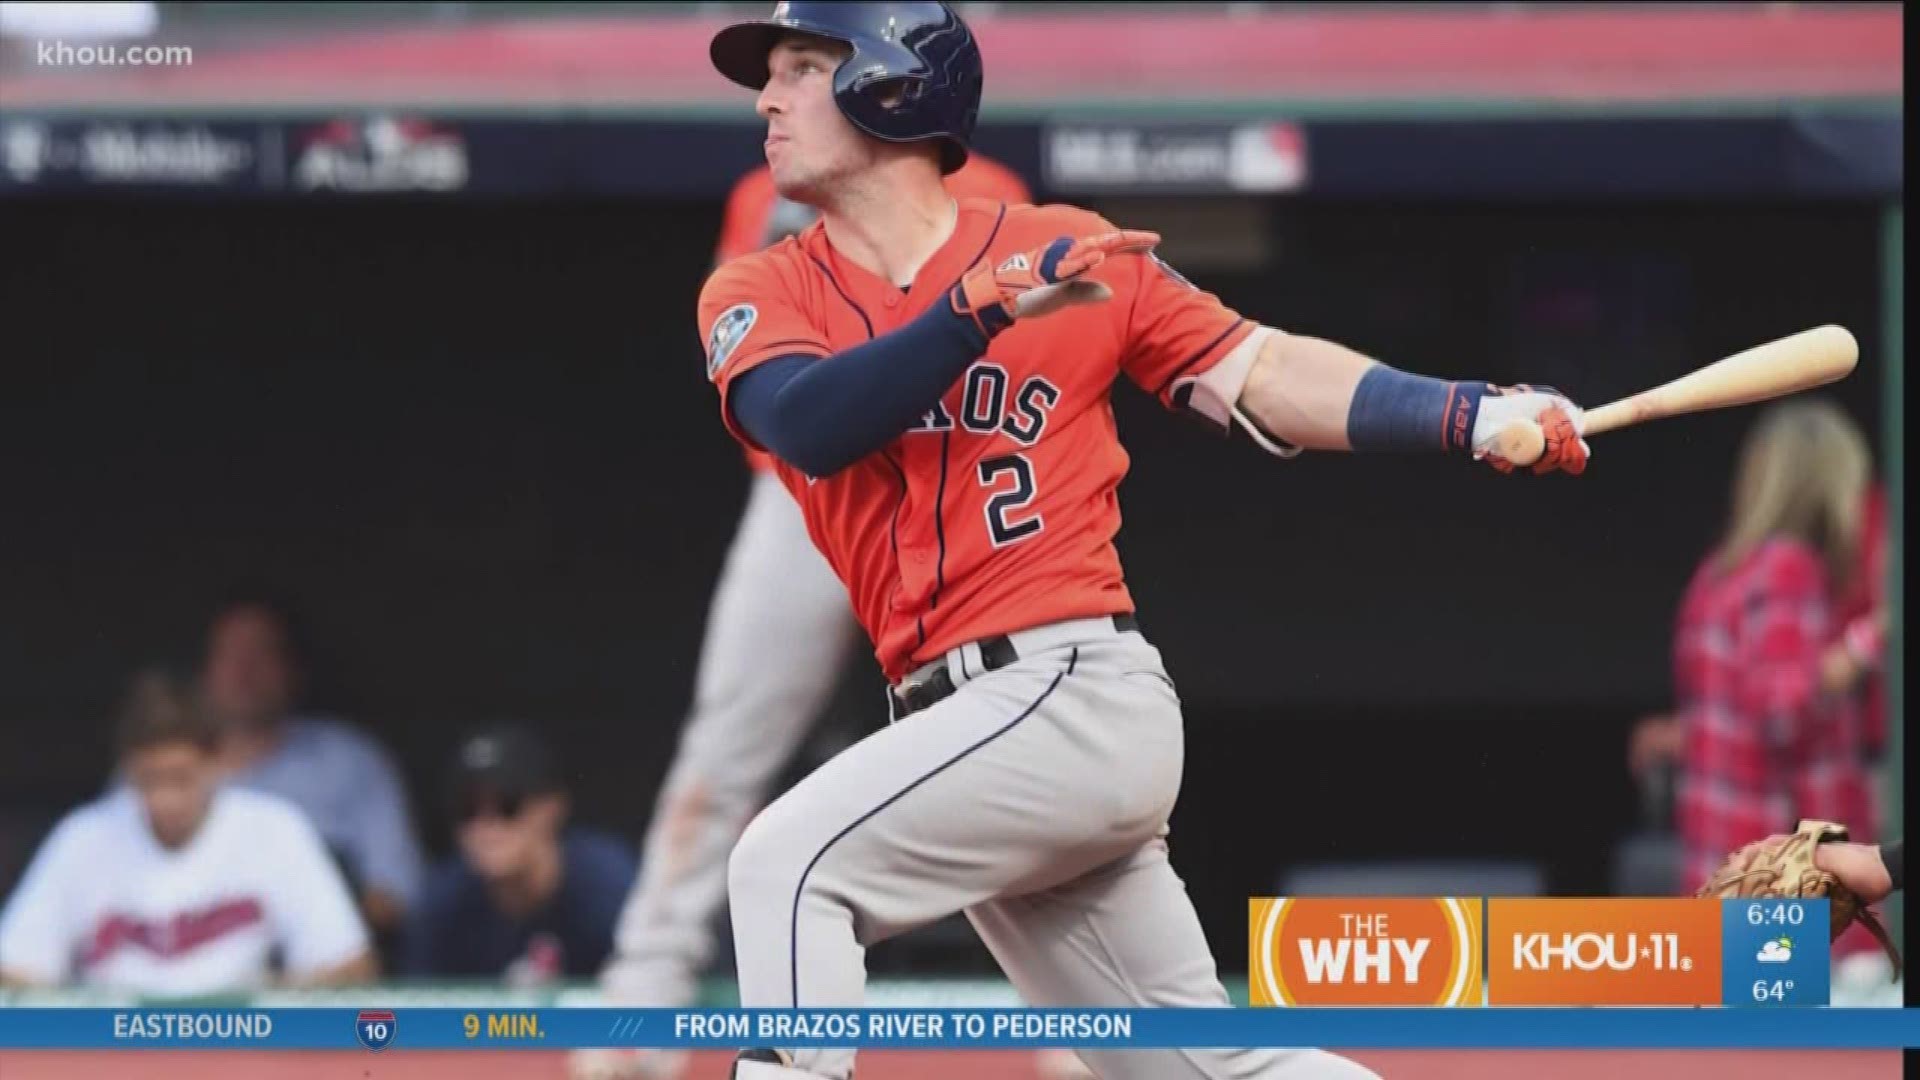 The Astros take on the Red Sox in Game 1 of the ALCS on Saturday night! Stephanie Whitfield shows us why this matchup has the entire country excited.